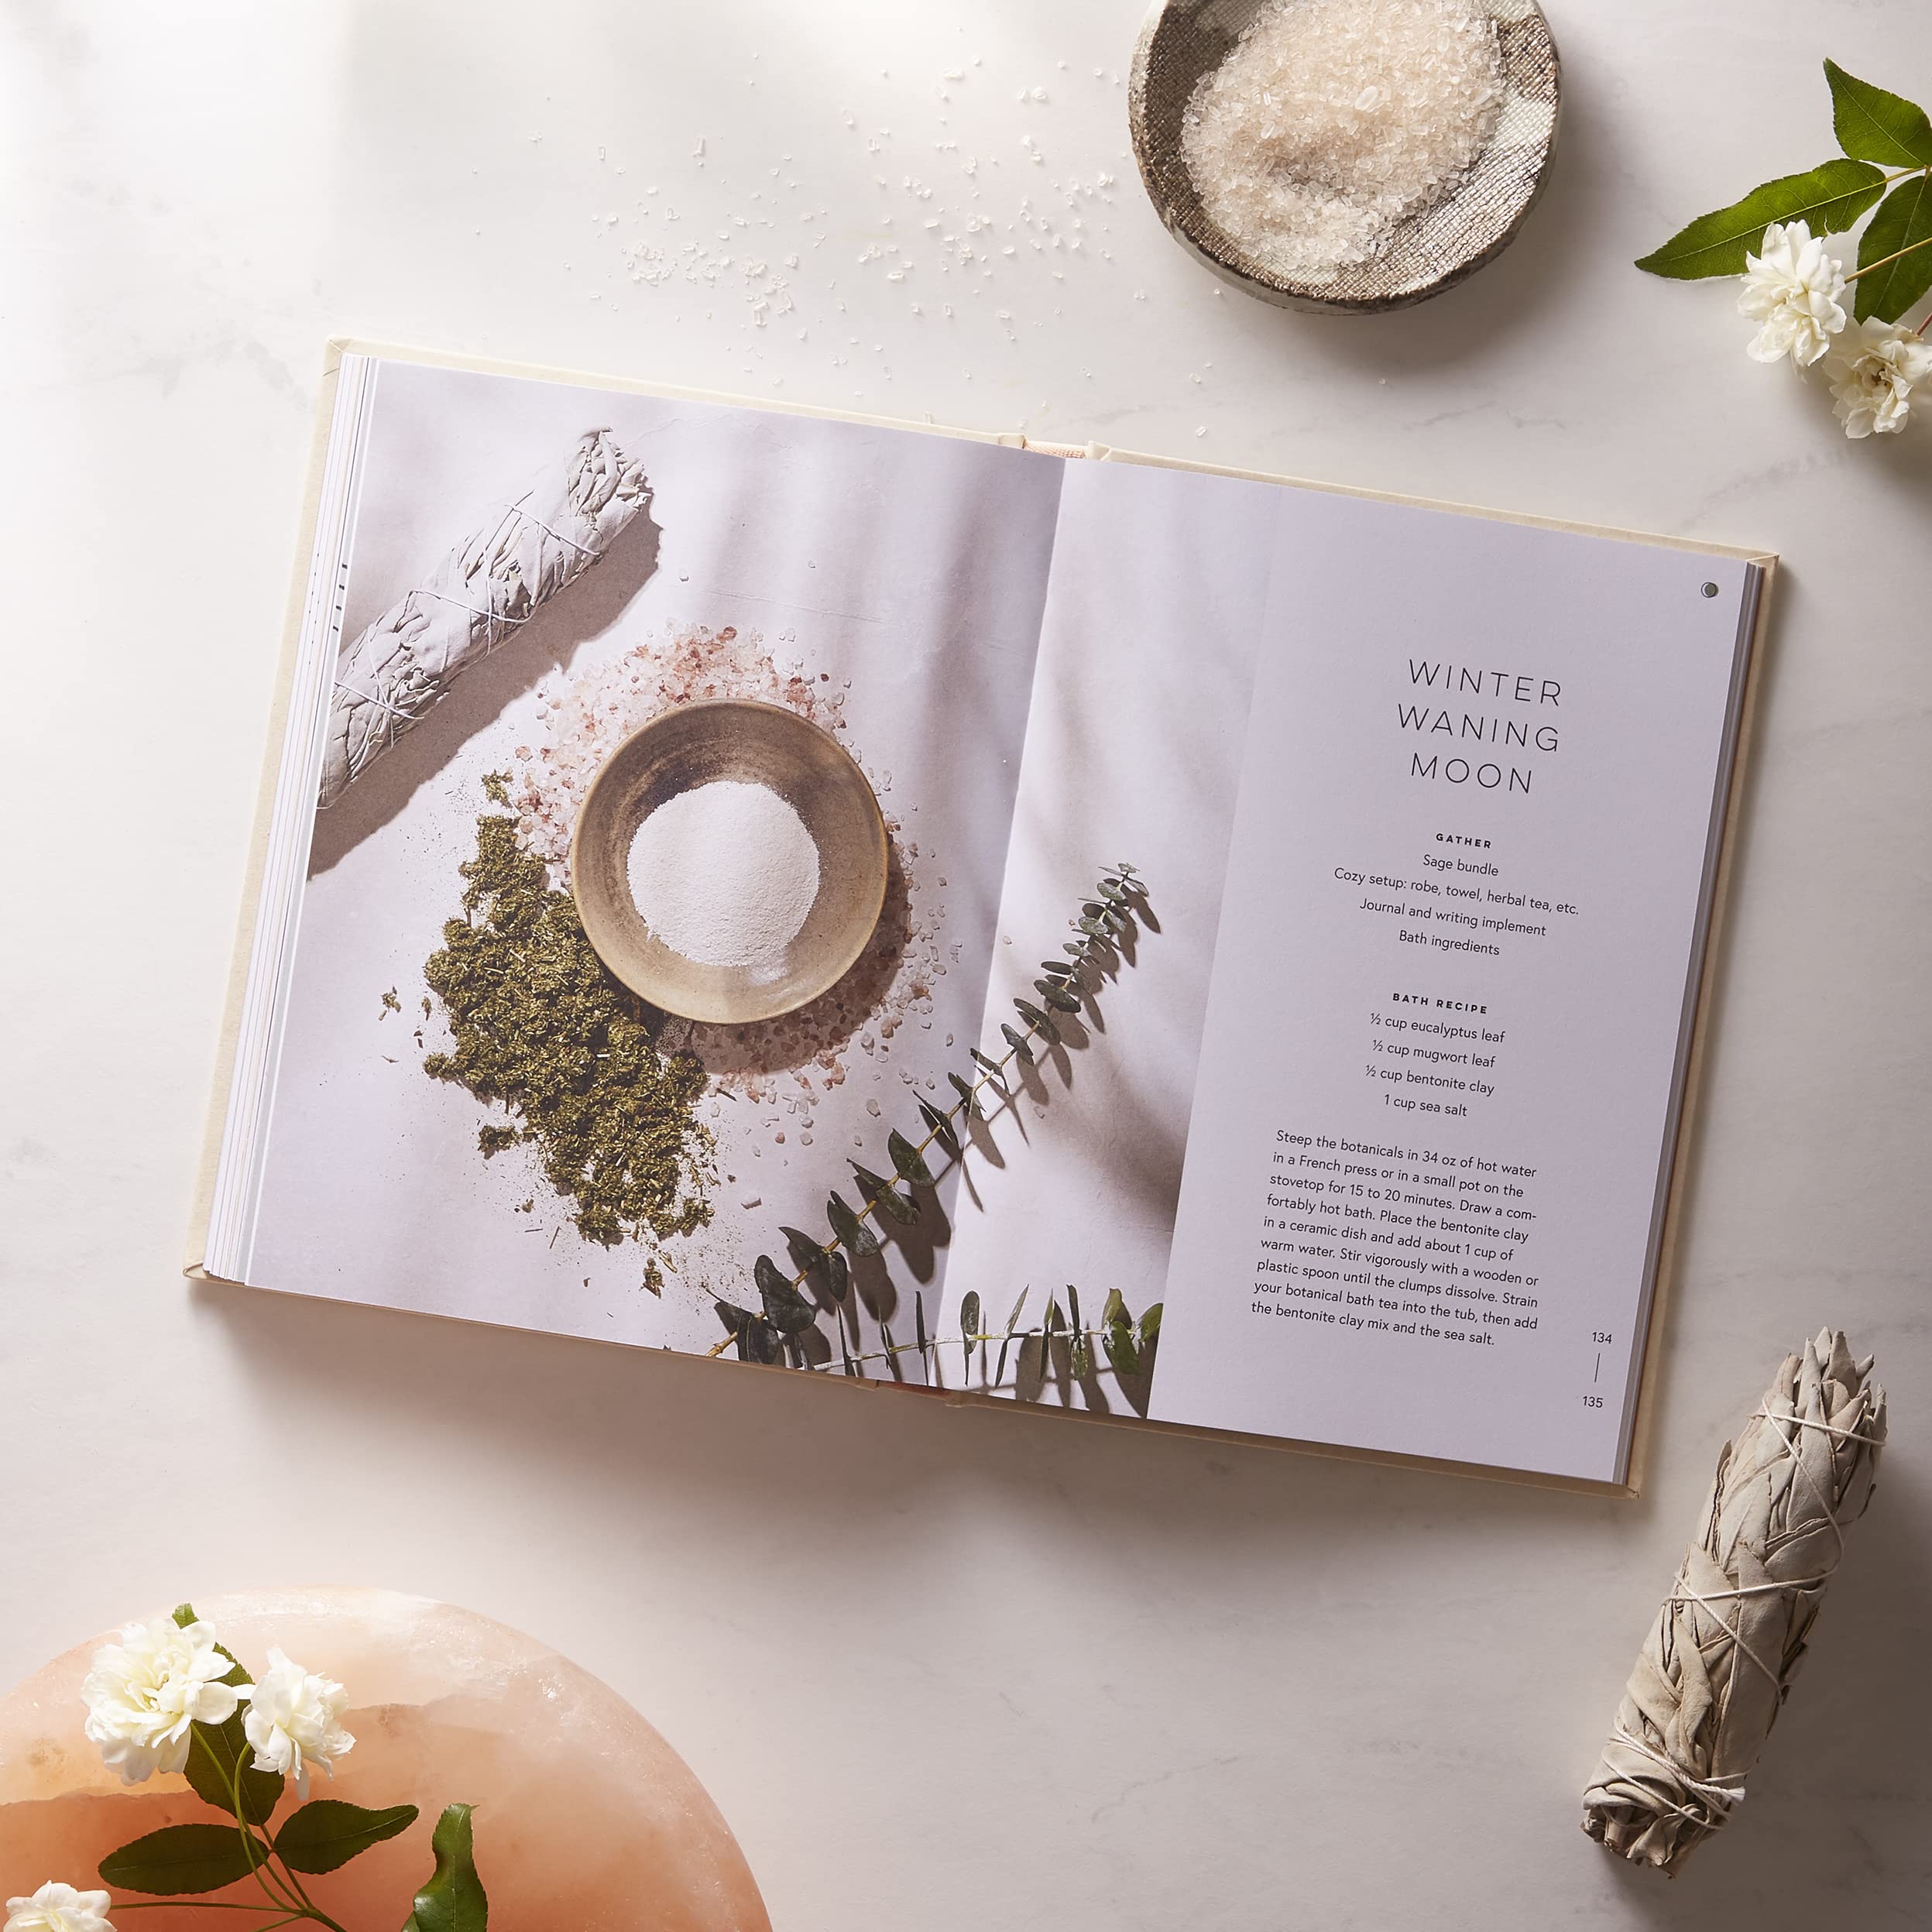 Moon Bath: Bathing Rituals and Recipes for Relaxation and Vitality